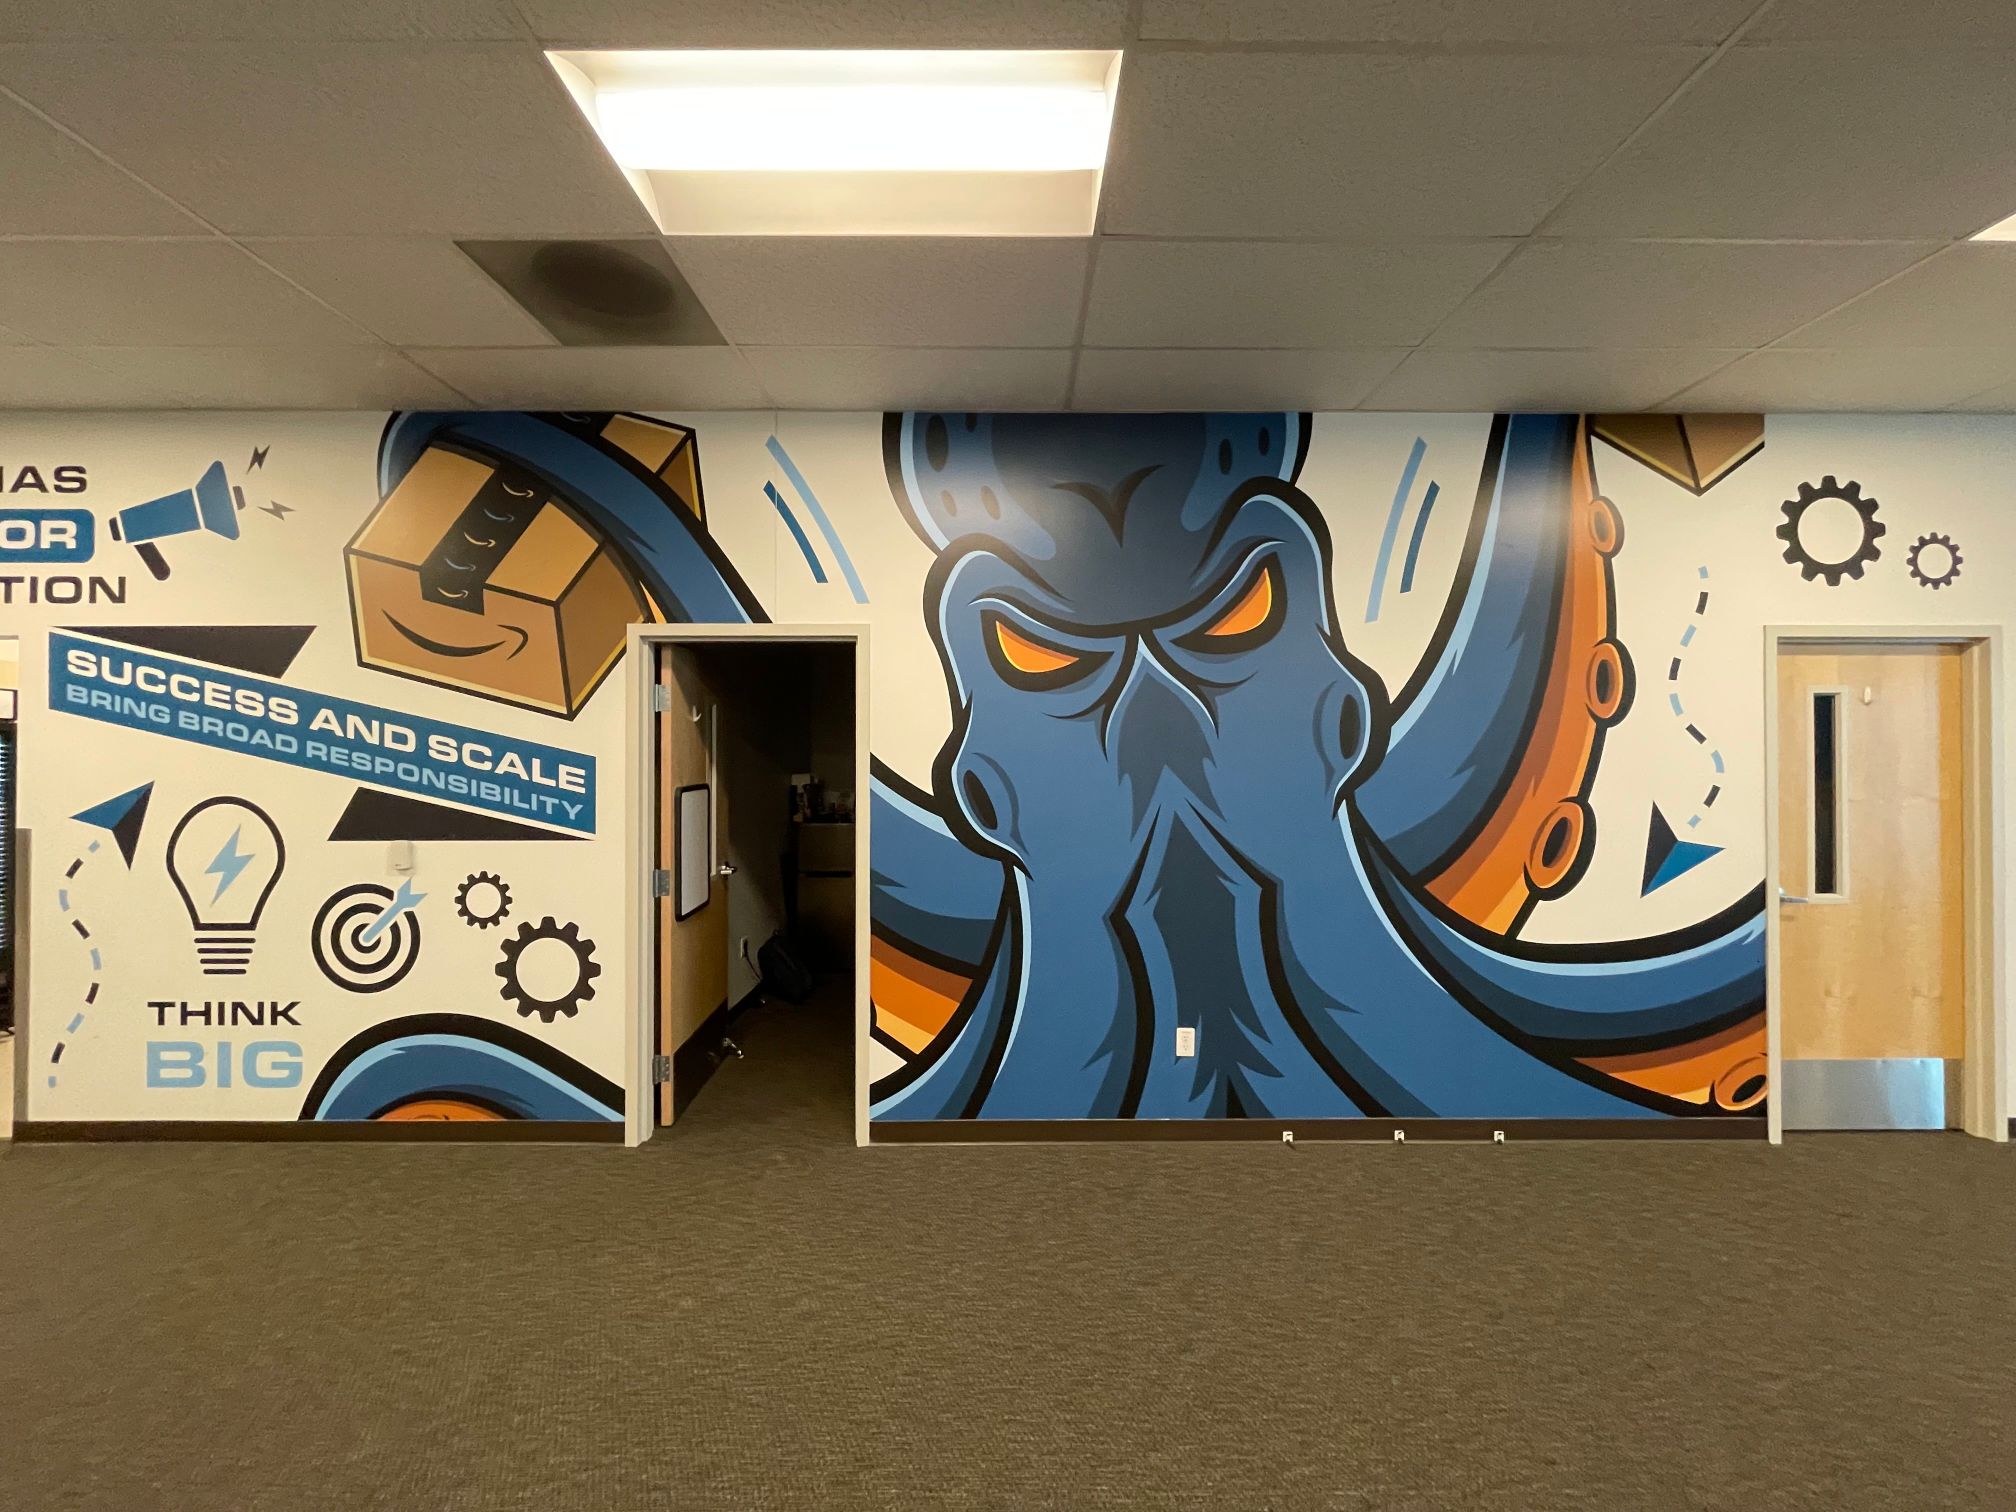 office wall graphics decals, and murals in Long Beach CA